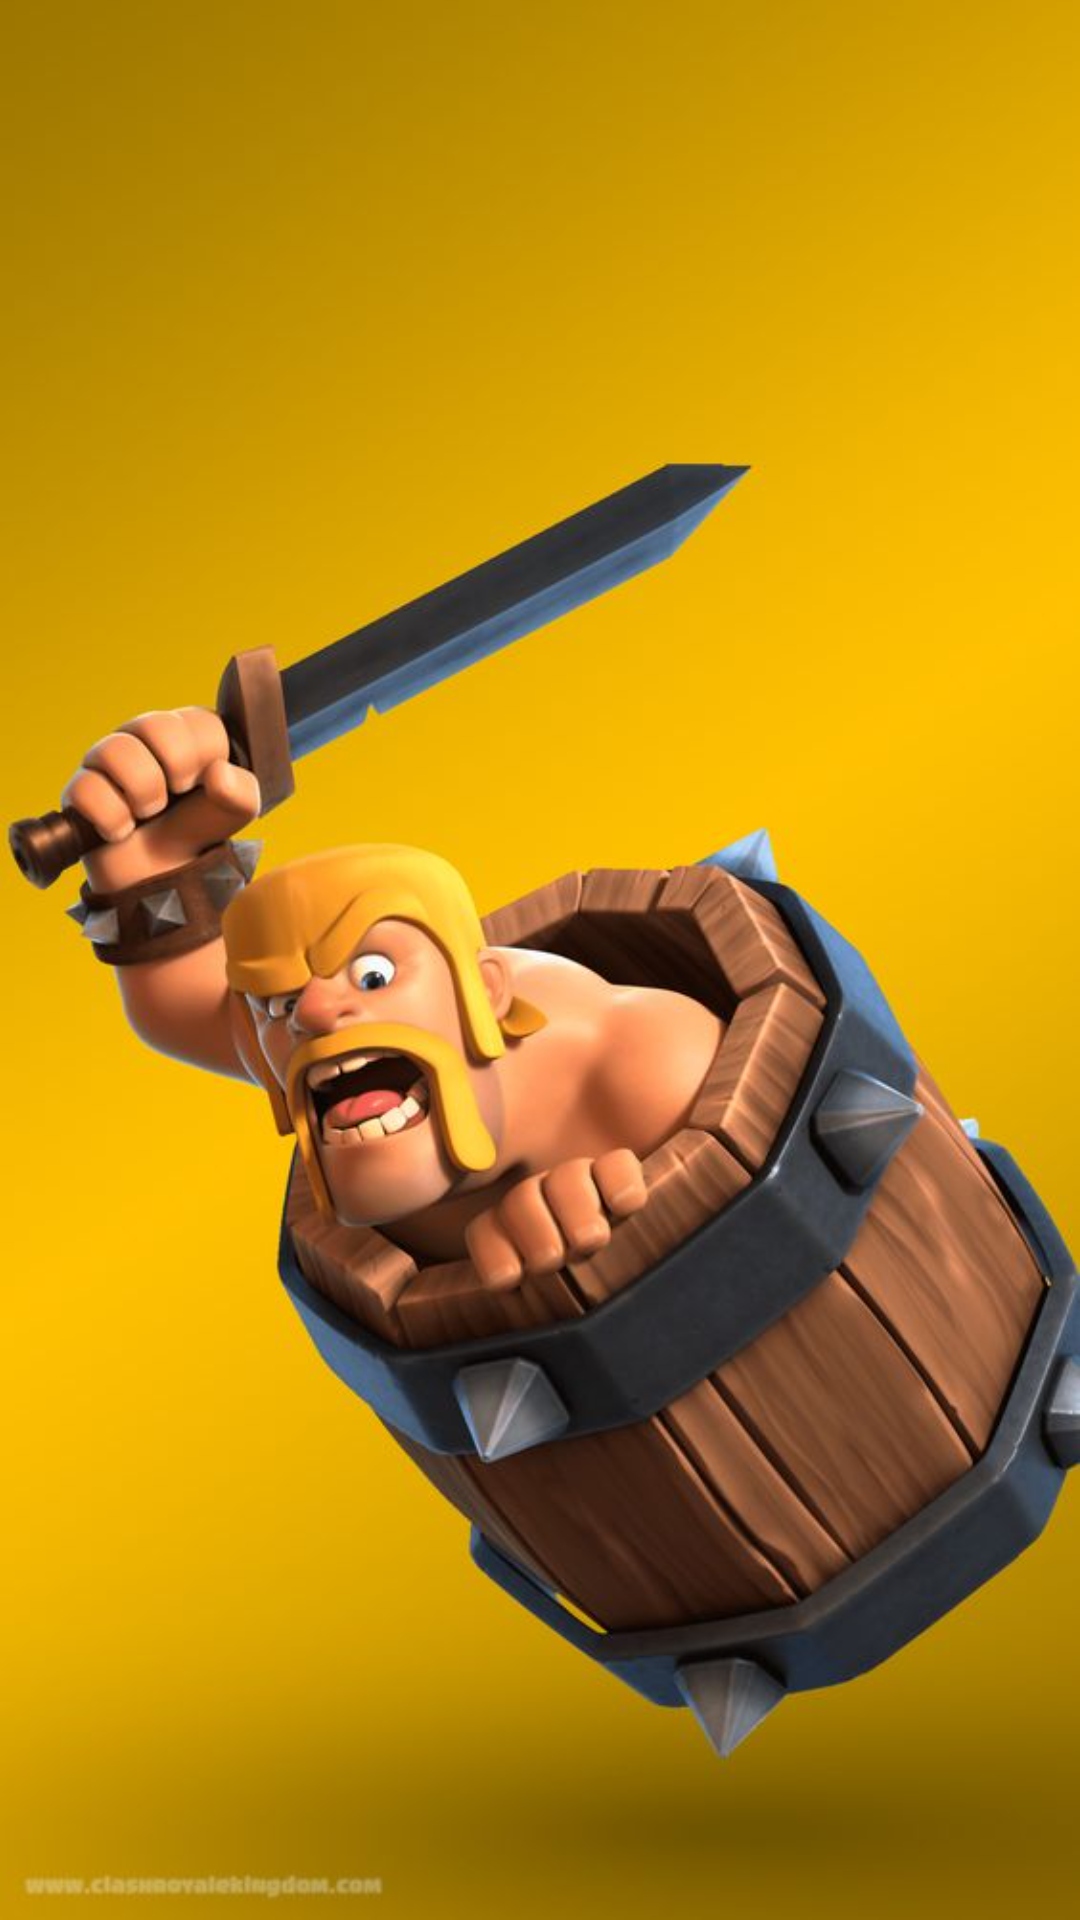 Clash of Clans Pictures